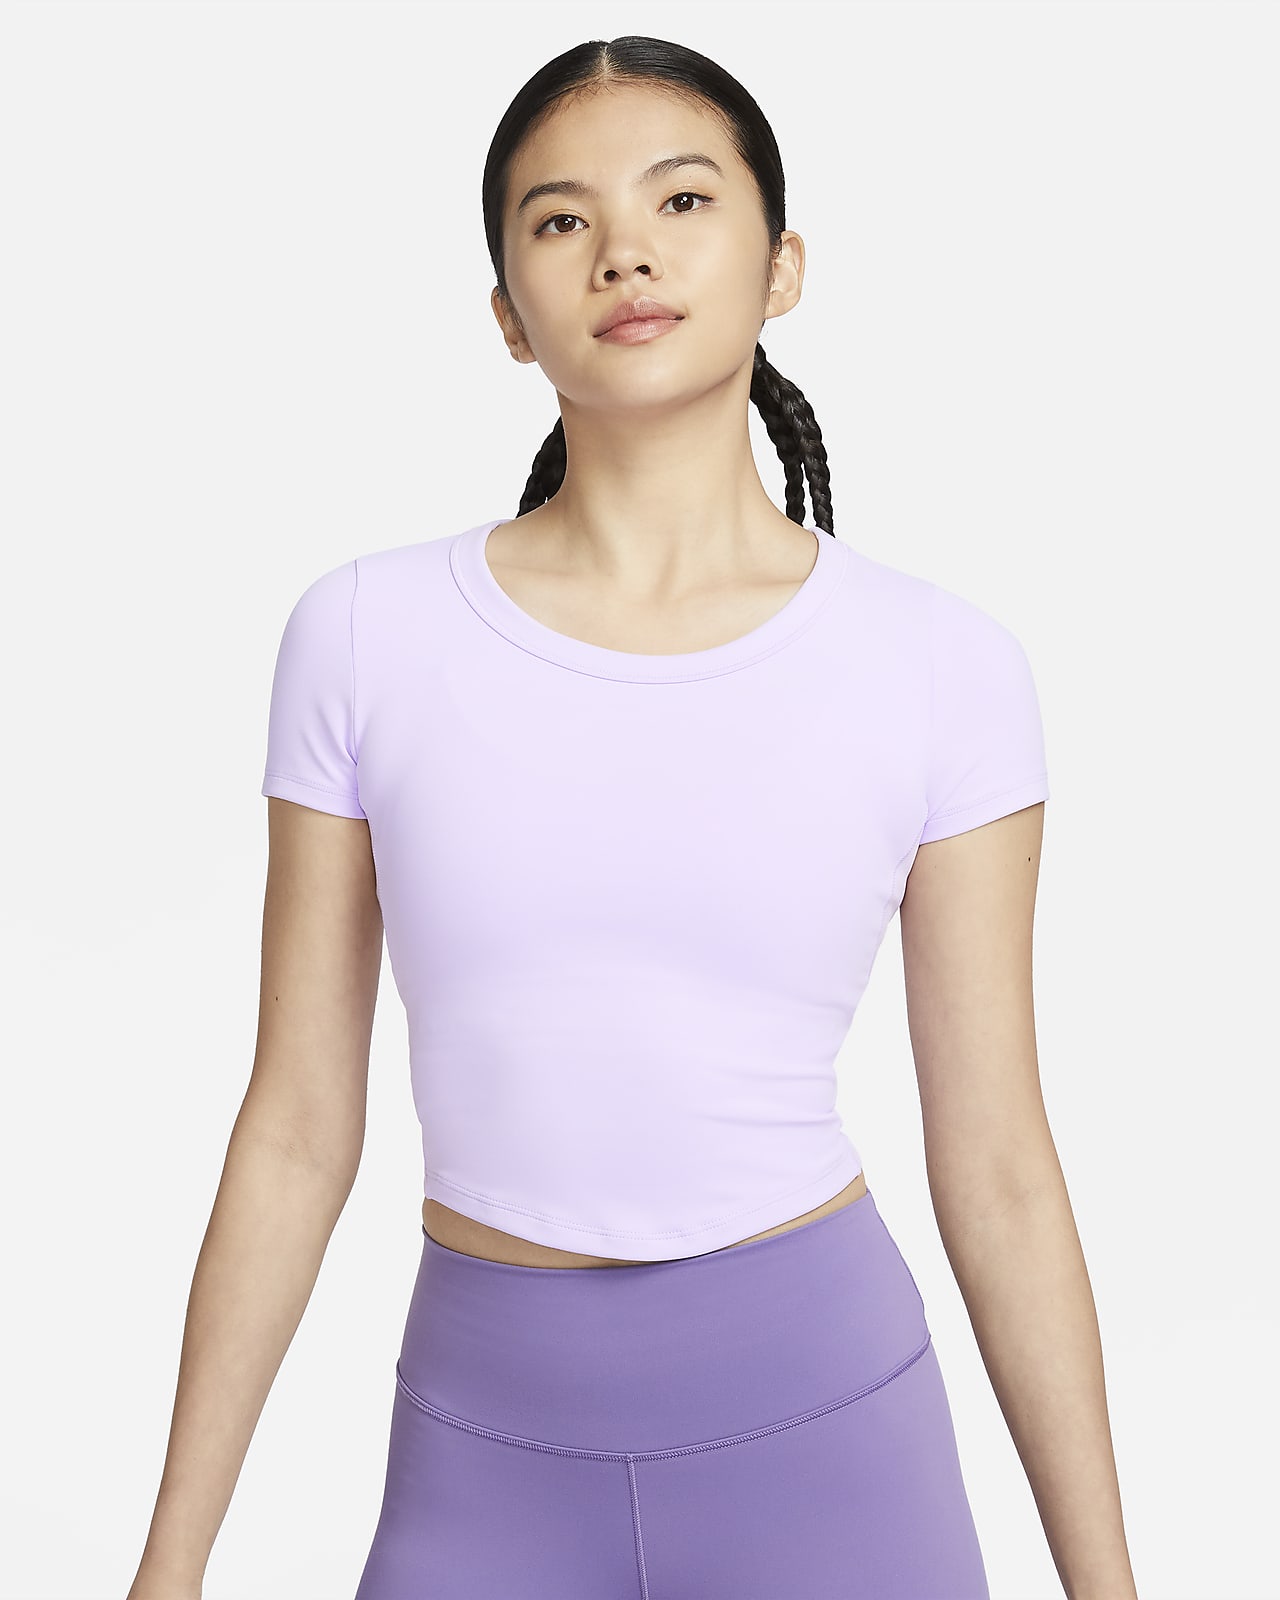 womens nike crop top and shorts Size 3x NWT MSRP $90